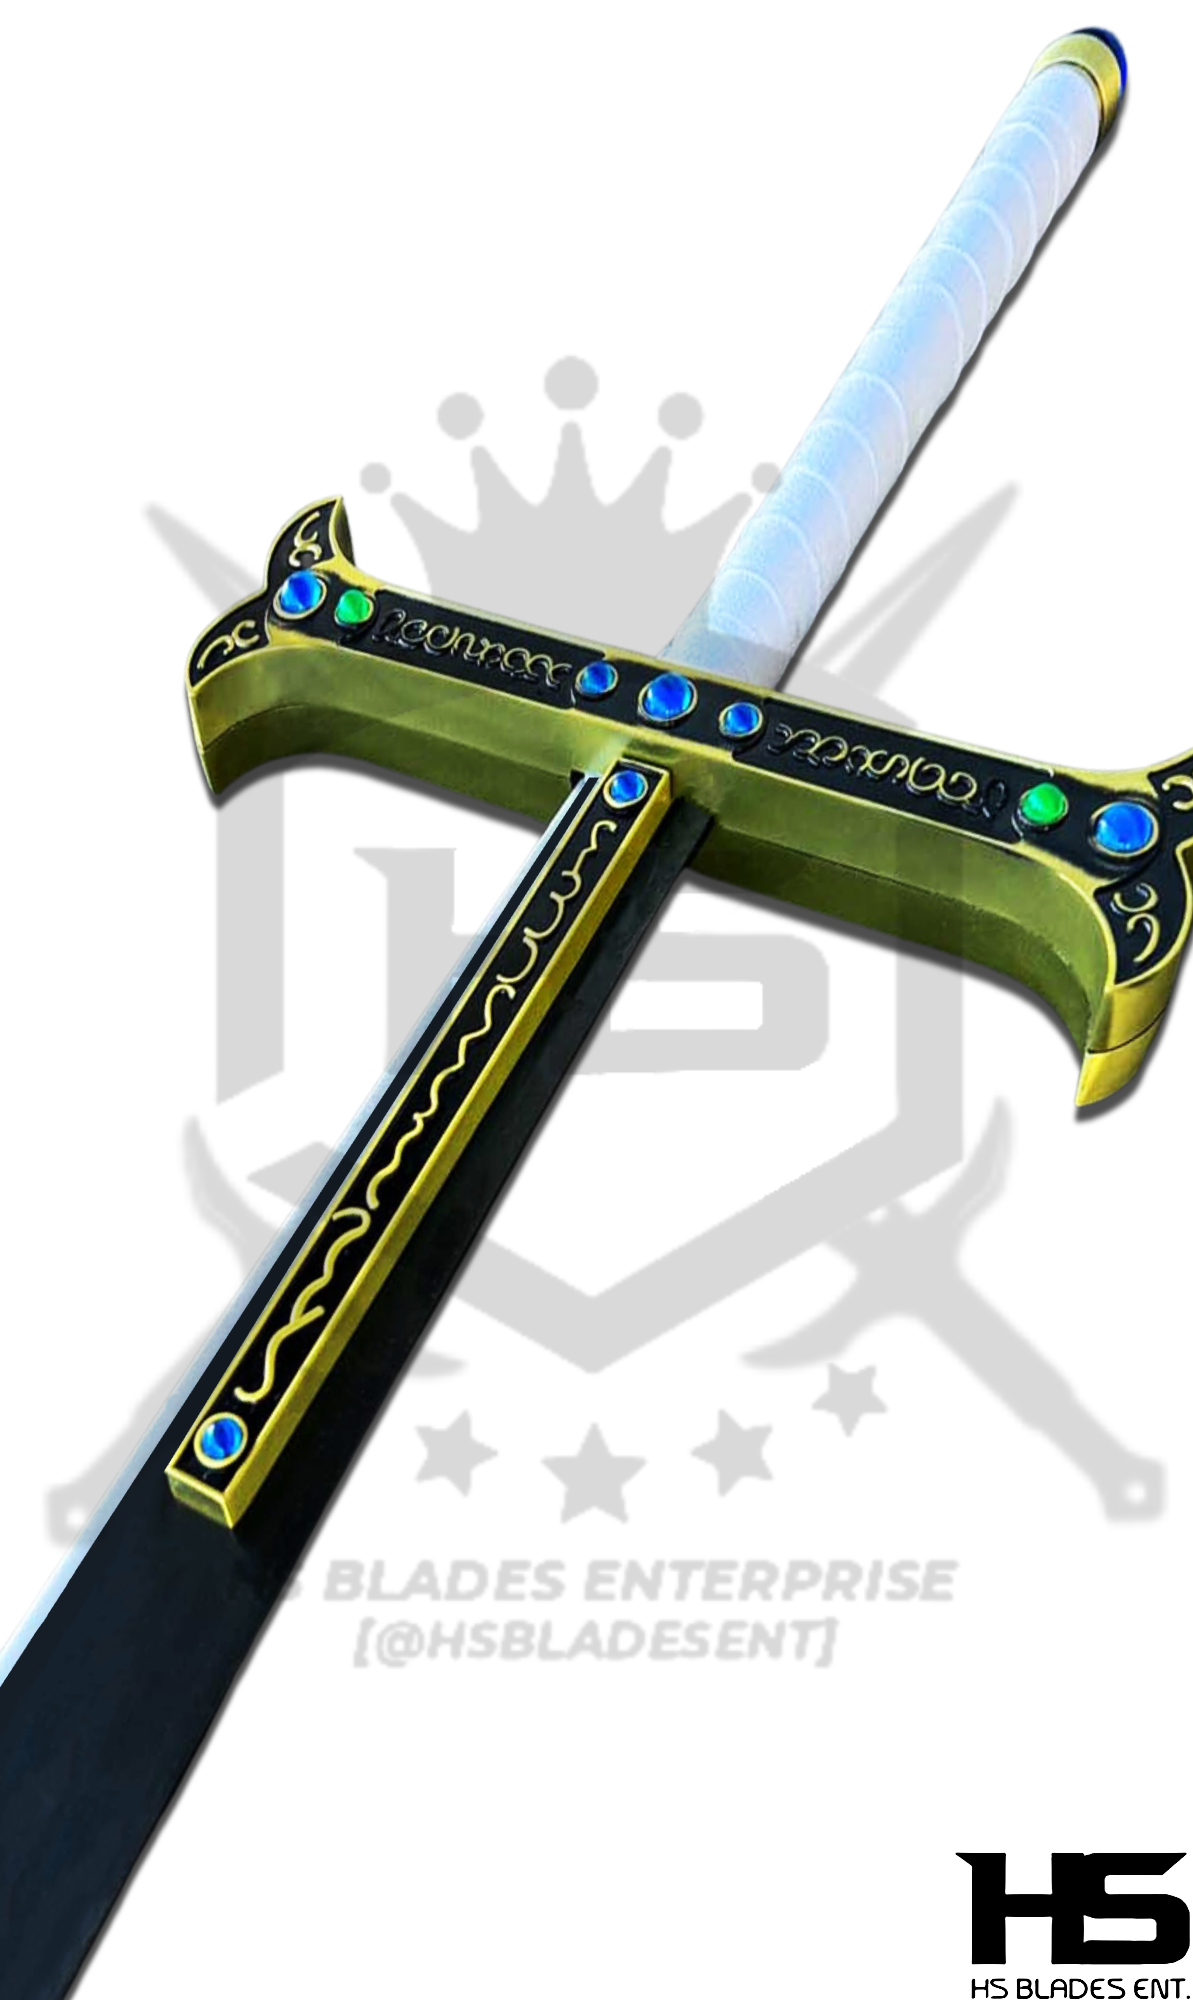 One Piece Yoru Sword of Dracule Mihawk in $77 (Japanese Steel is also  Available) from One Piece Swords